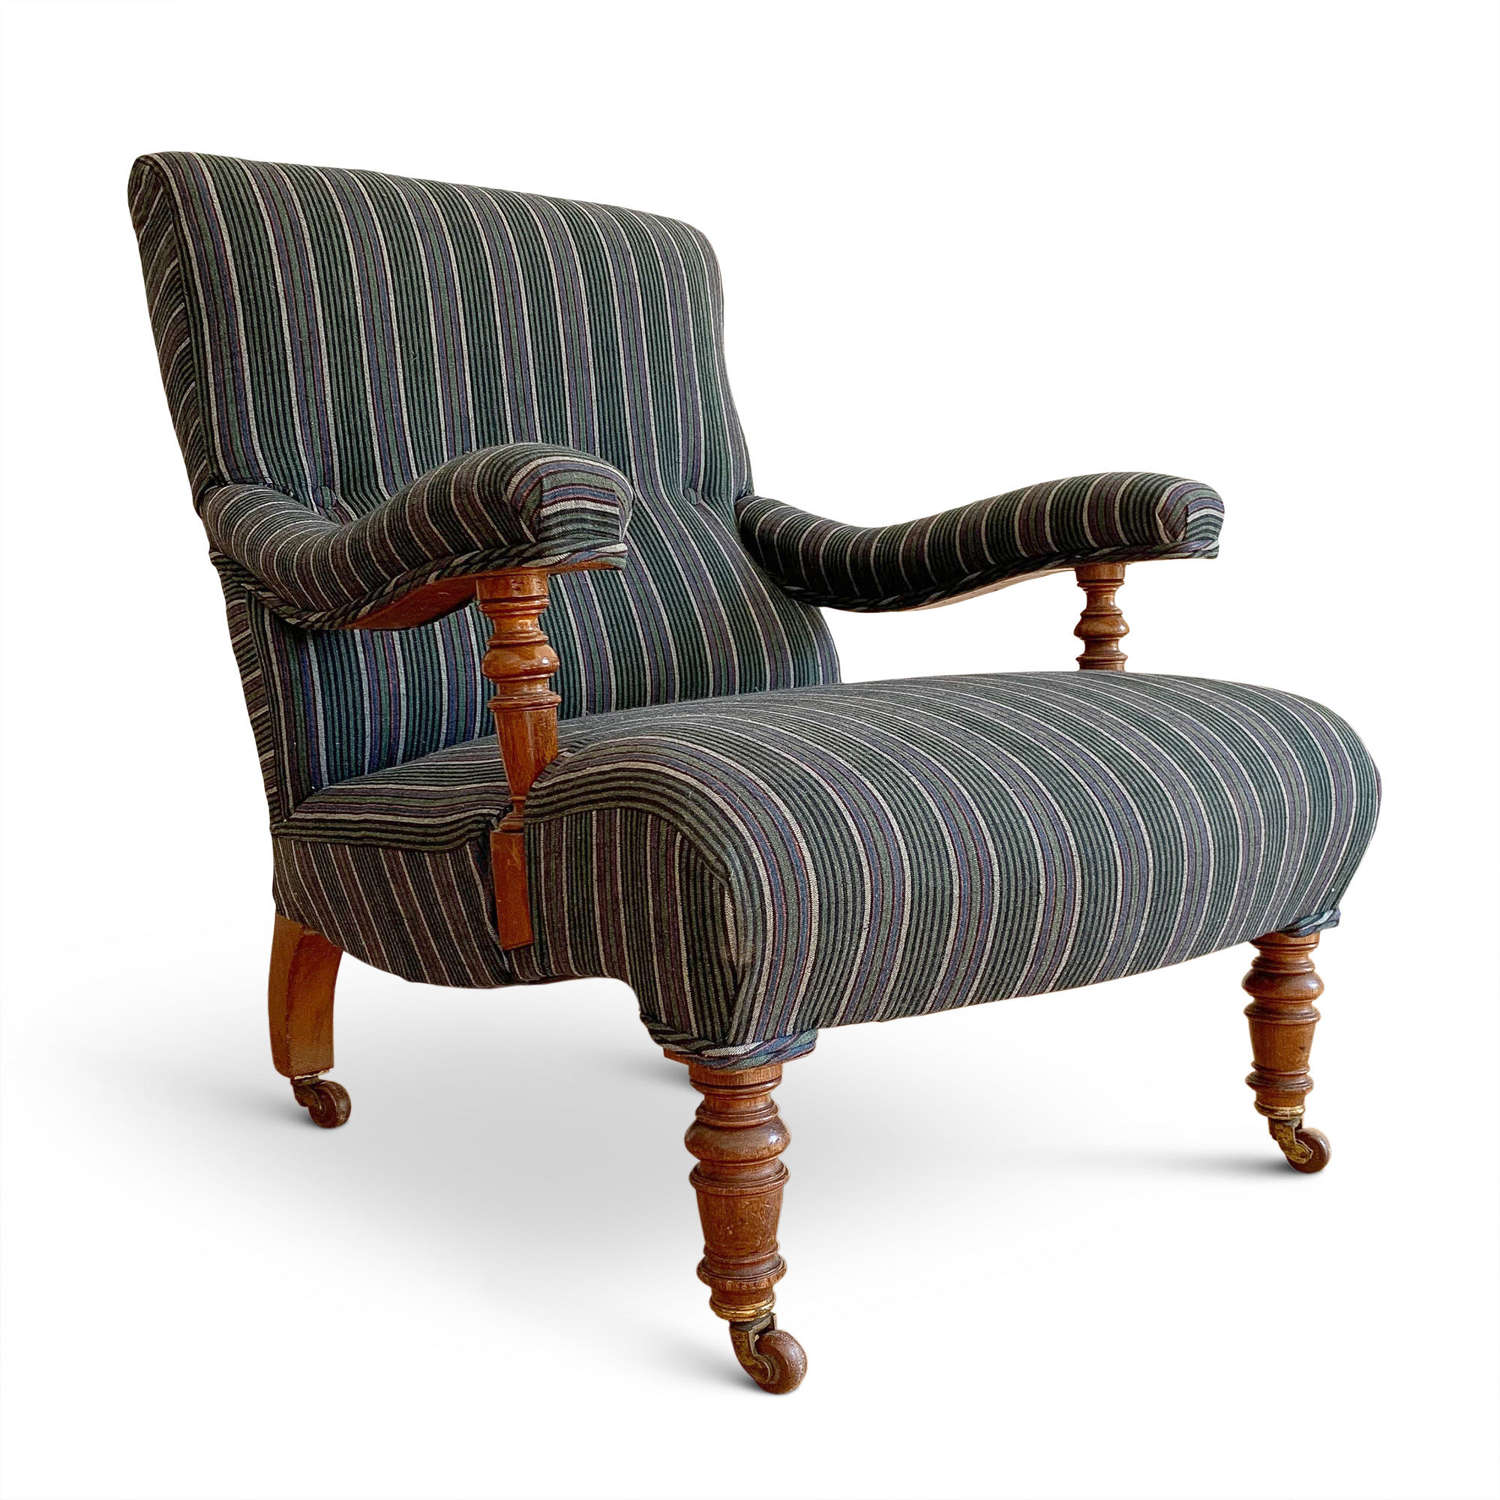 Attractive open armed library chair